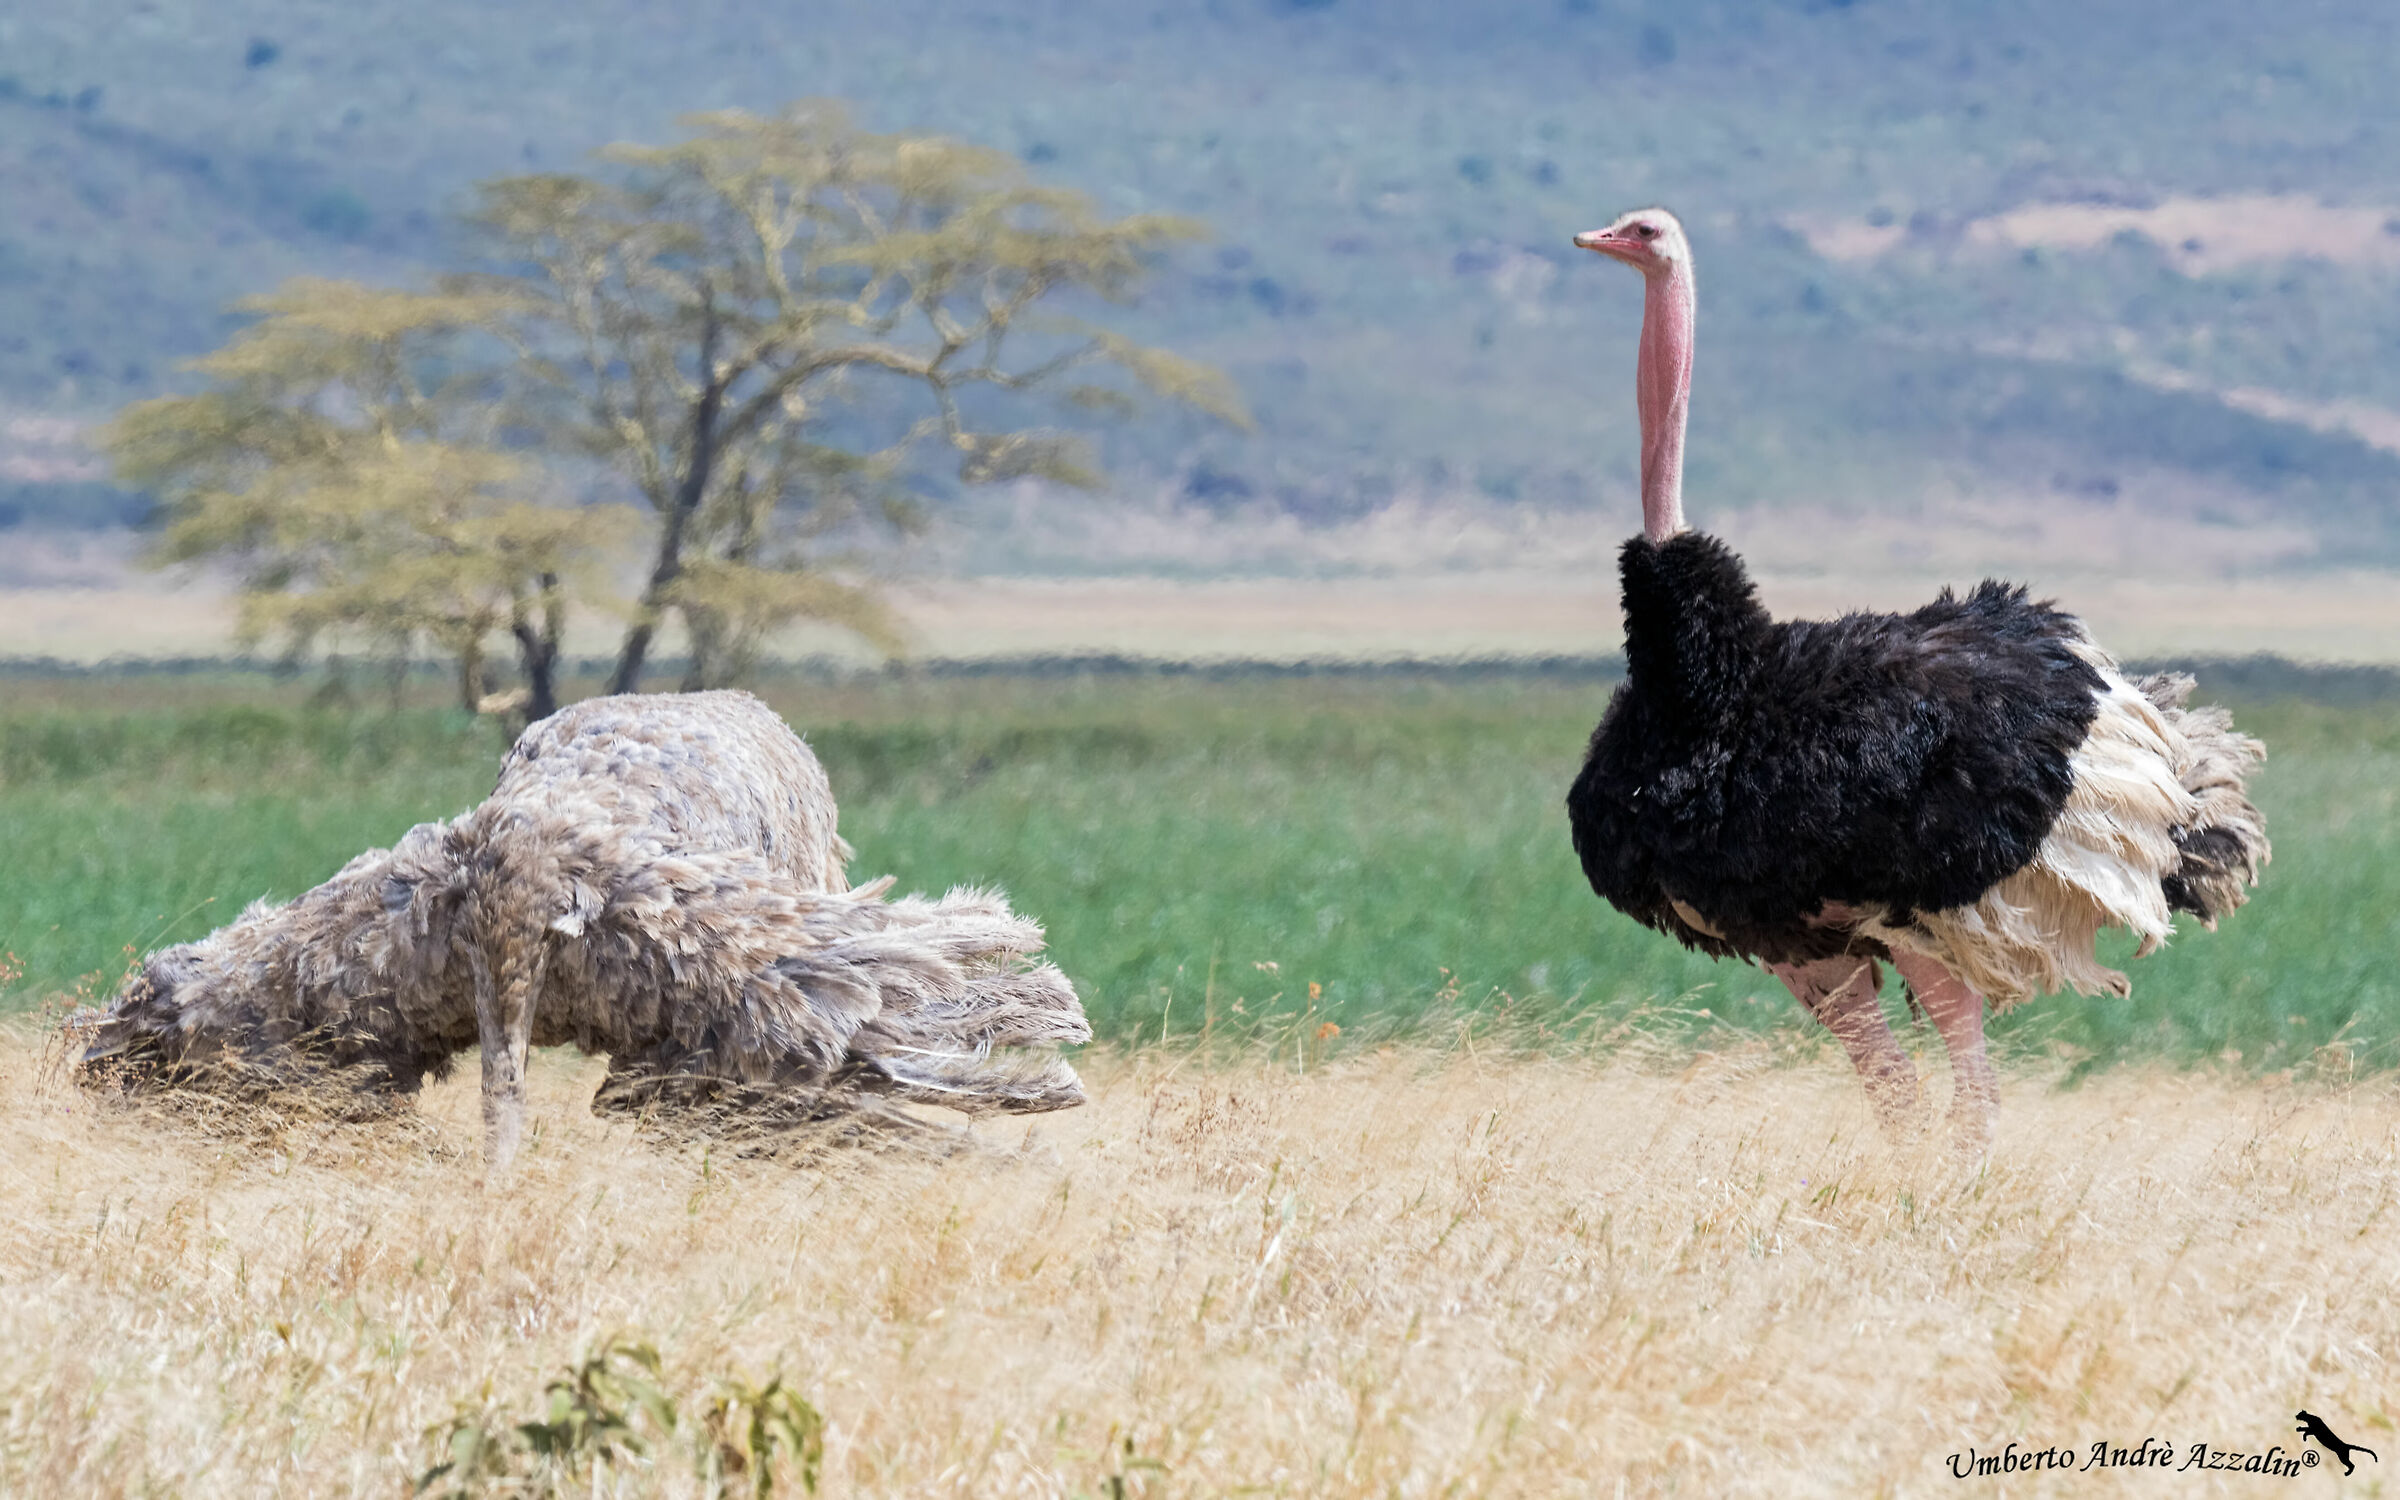 The Dance of the ostriches...